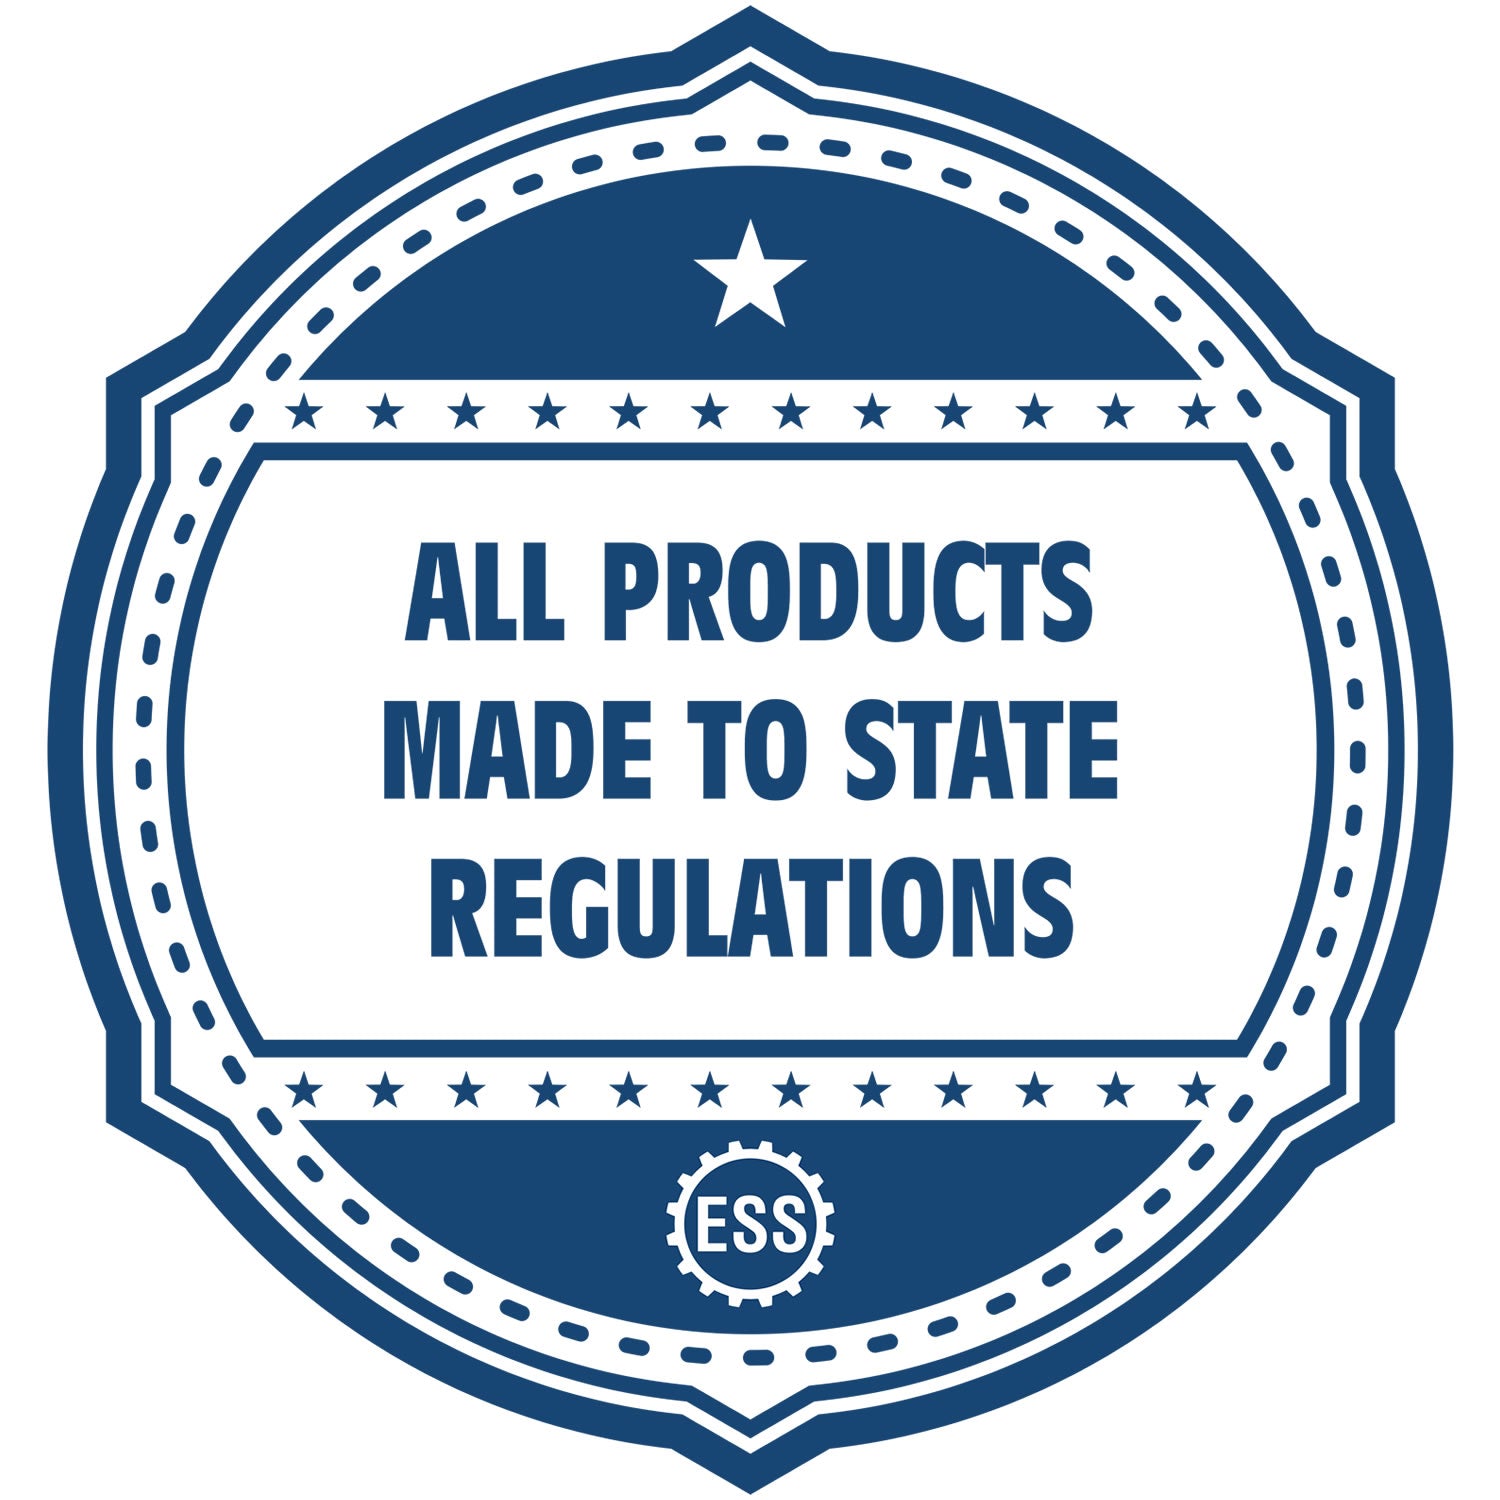 A blue icon or badge for the Gift Colorado Engineer Seal showing that this product is made in compliance with state regulations.